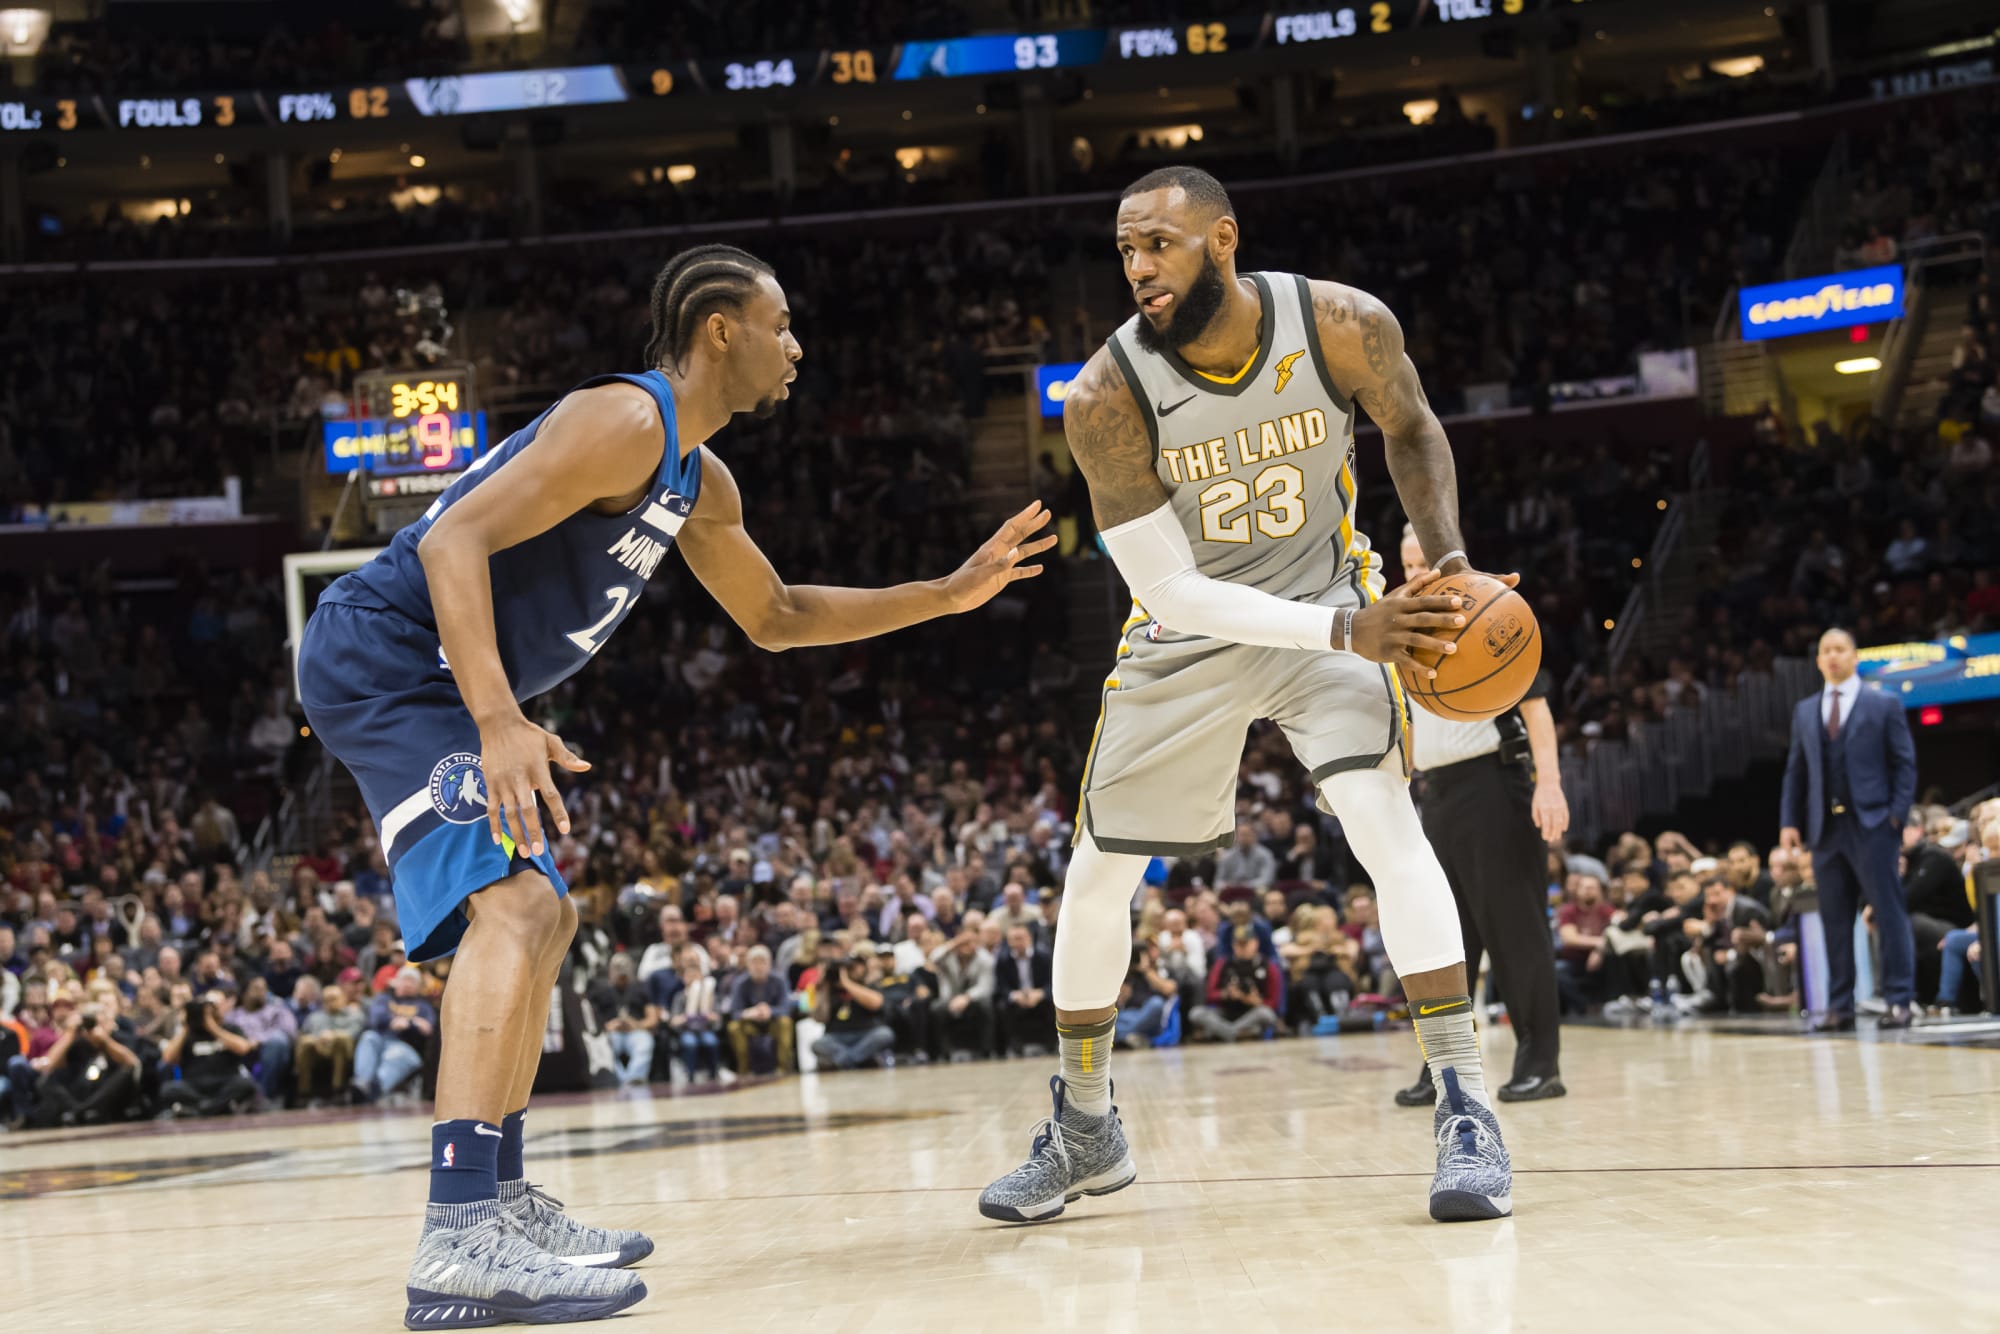 Andrew Wiggins thinks he will have received a identify for the Cavs with LeBron James